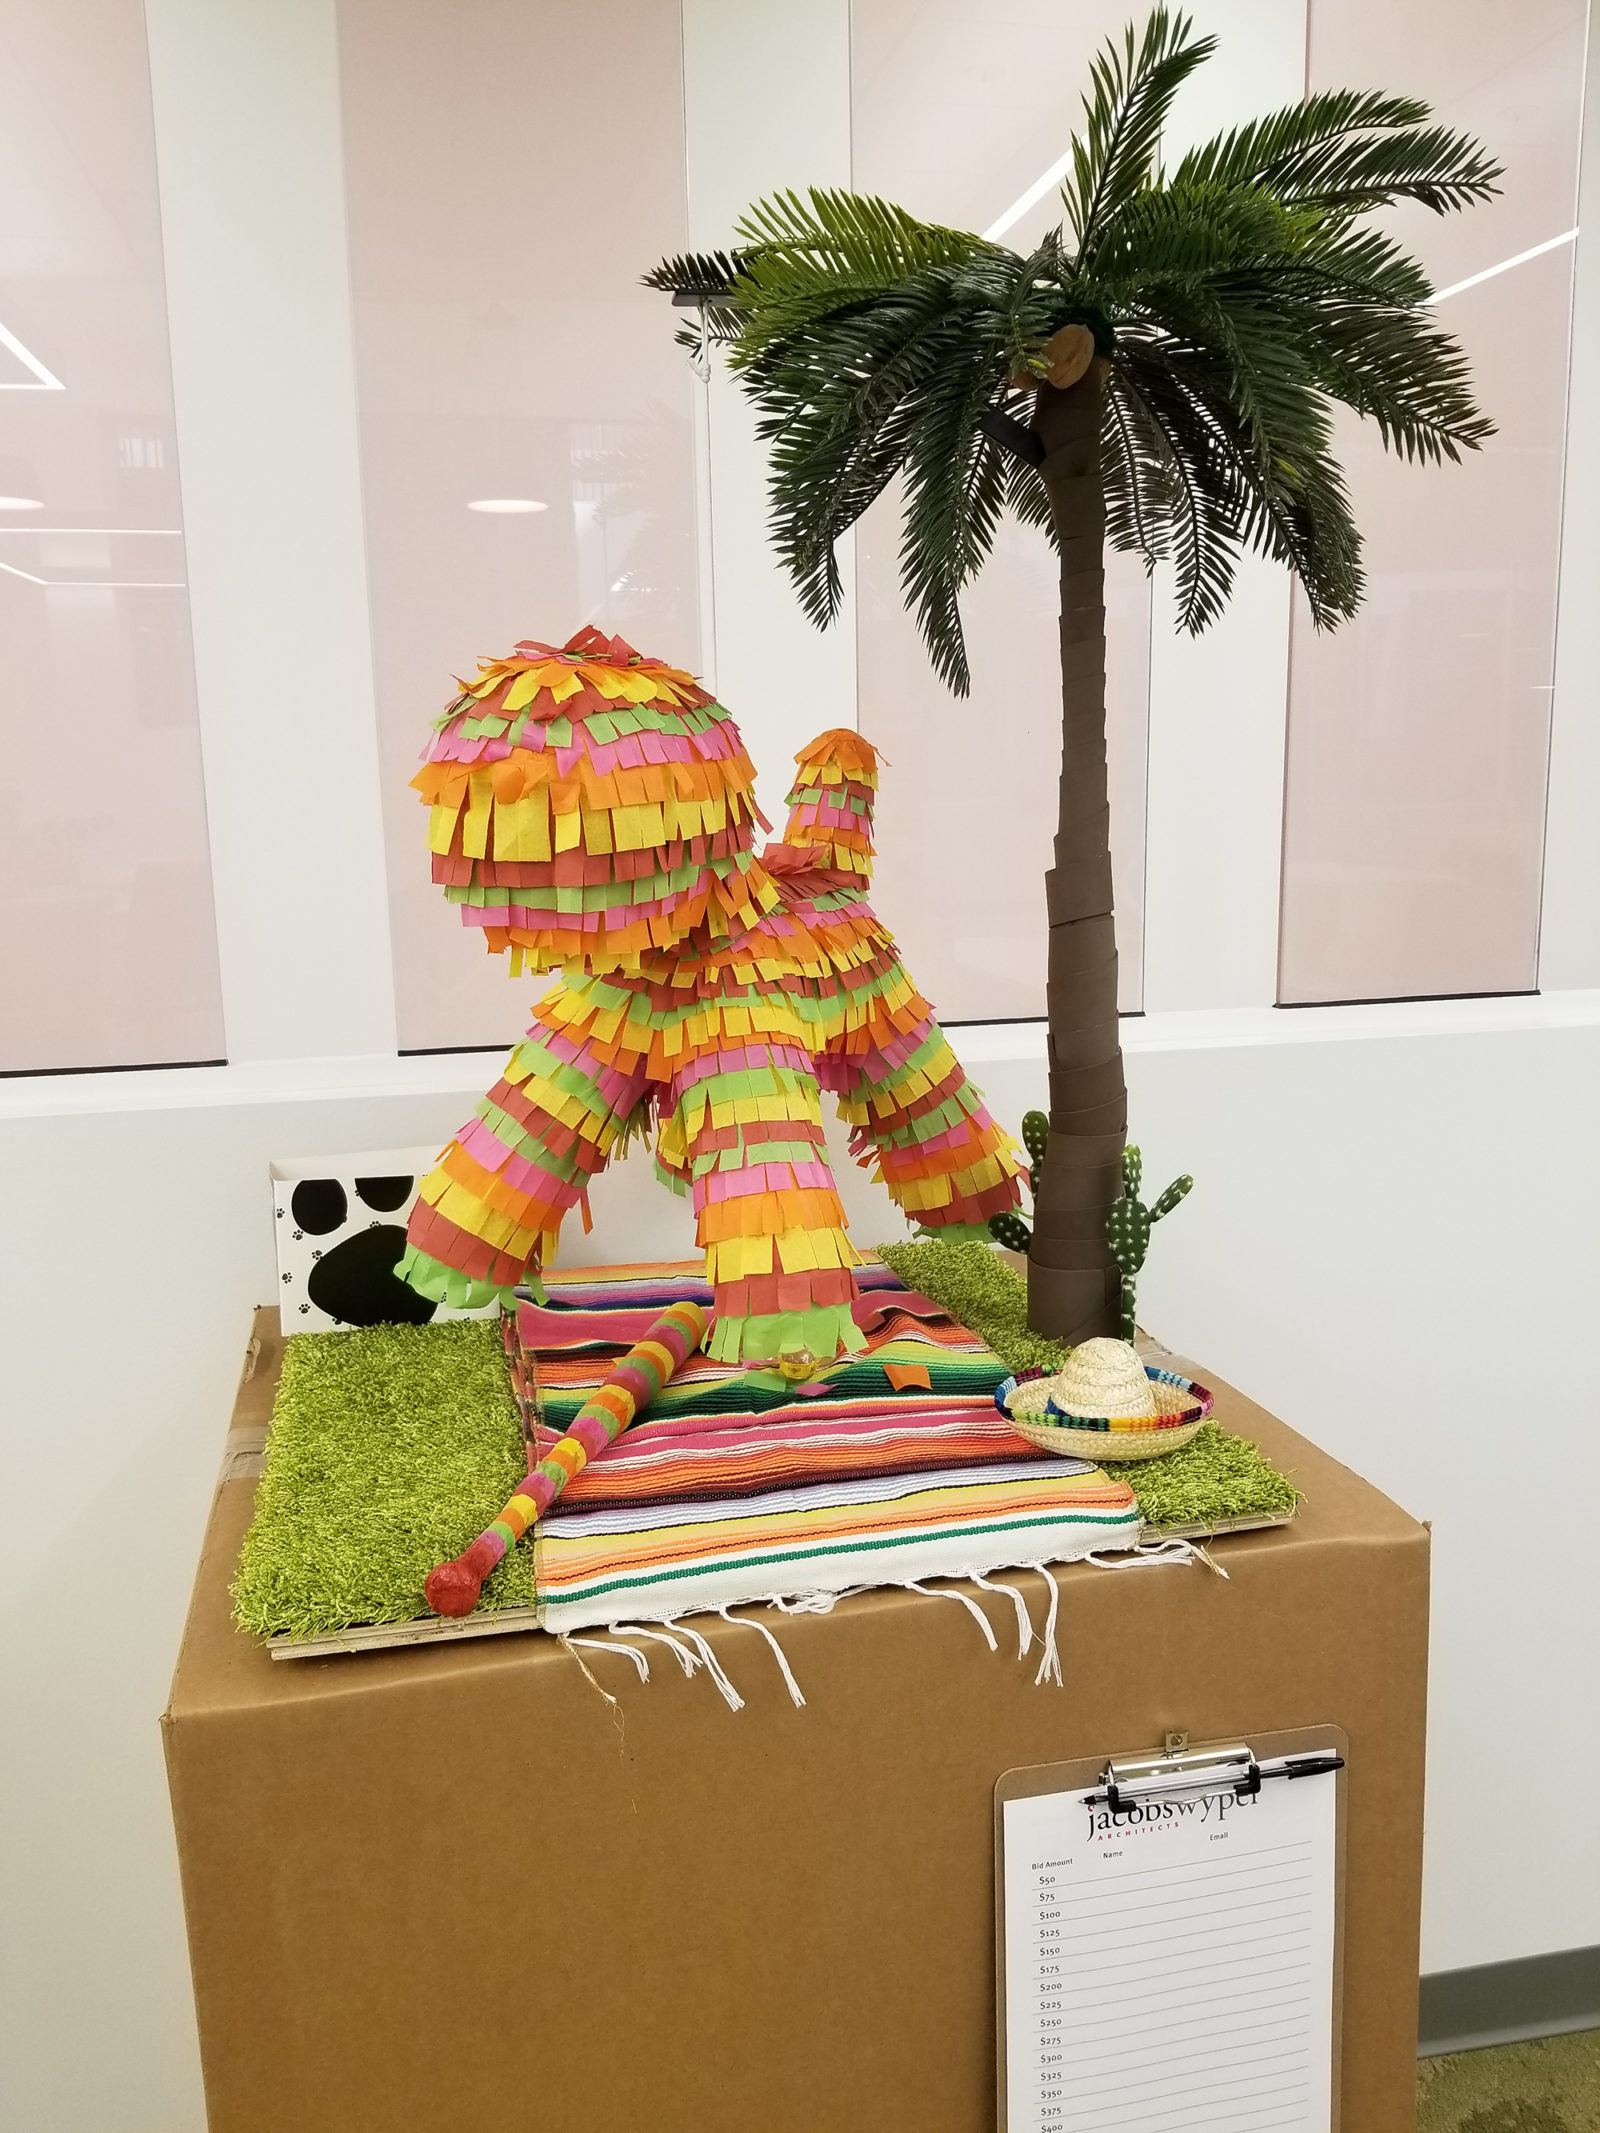 Cinco de mayo inspired setting with dog decorated like a piñata, next to a palm tree, mini sombrero and striped blanket.